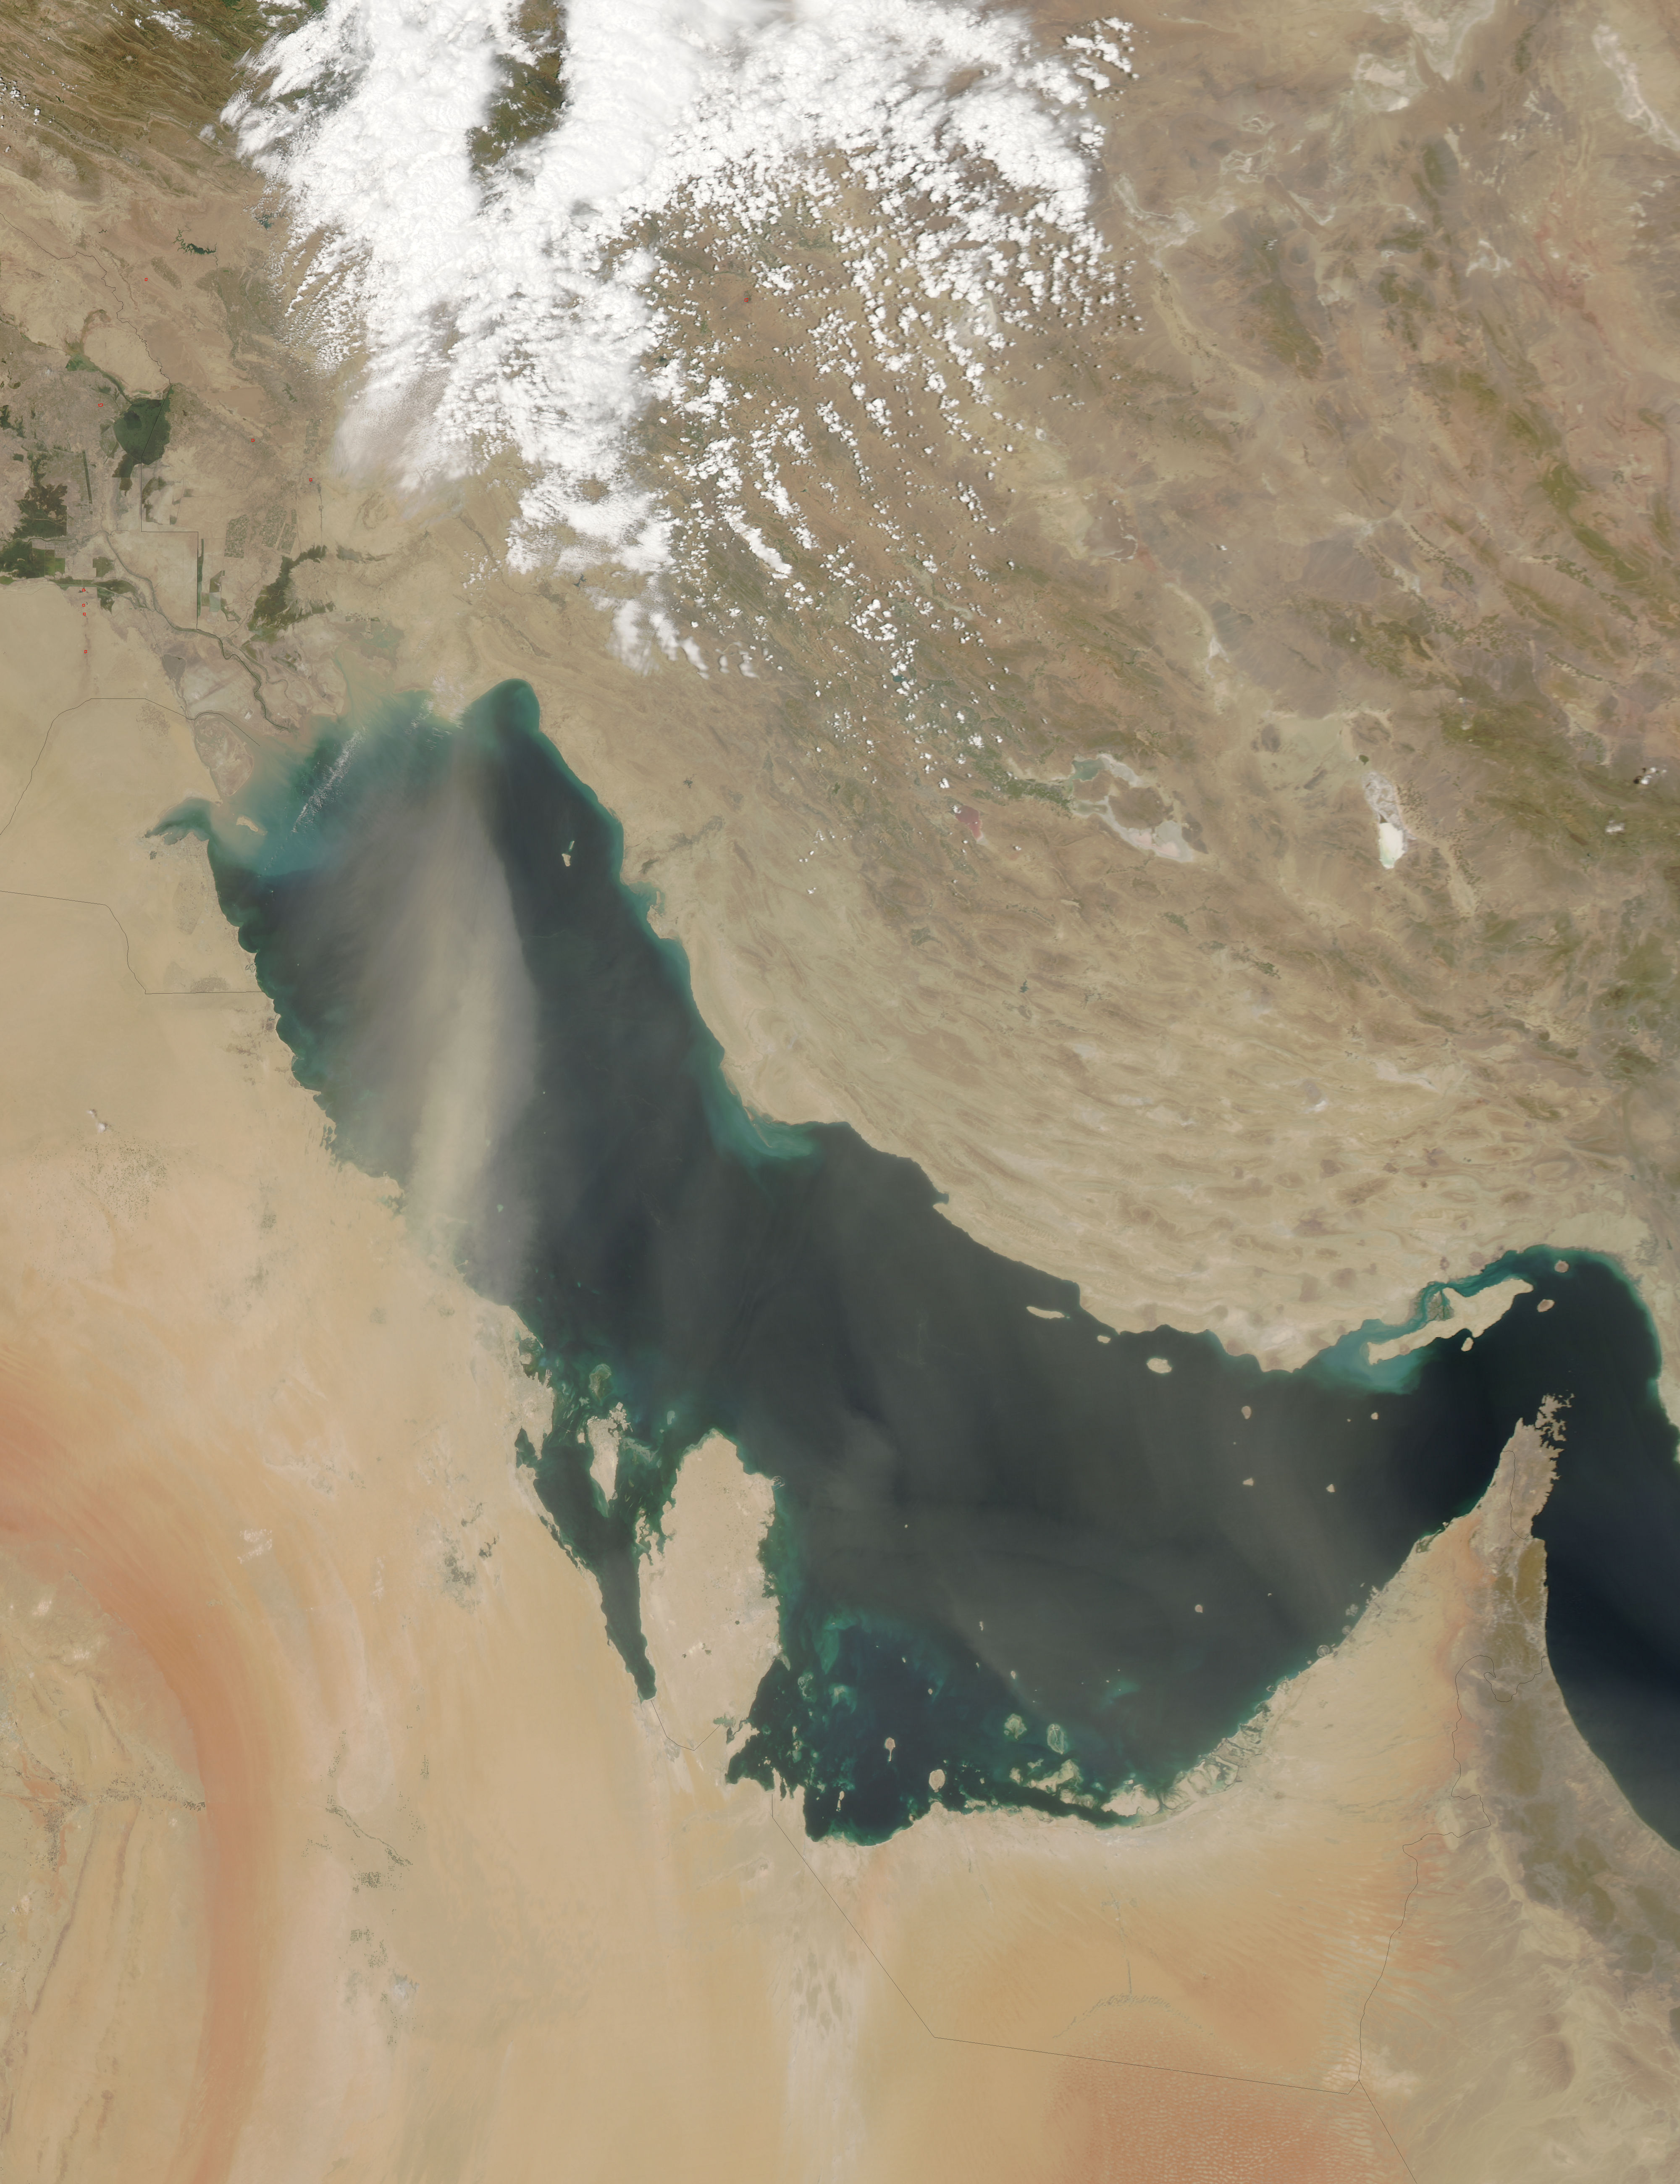 Dust storm over the Persian Gulf - related image preview